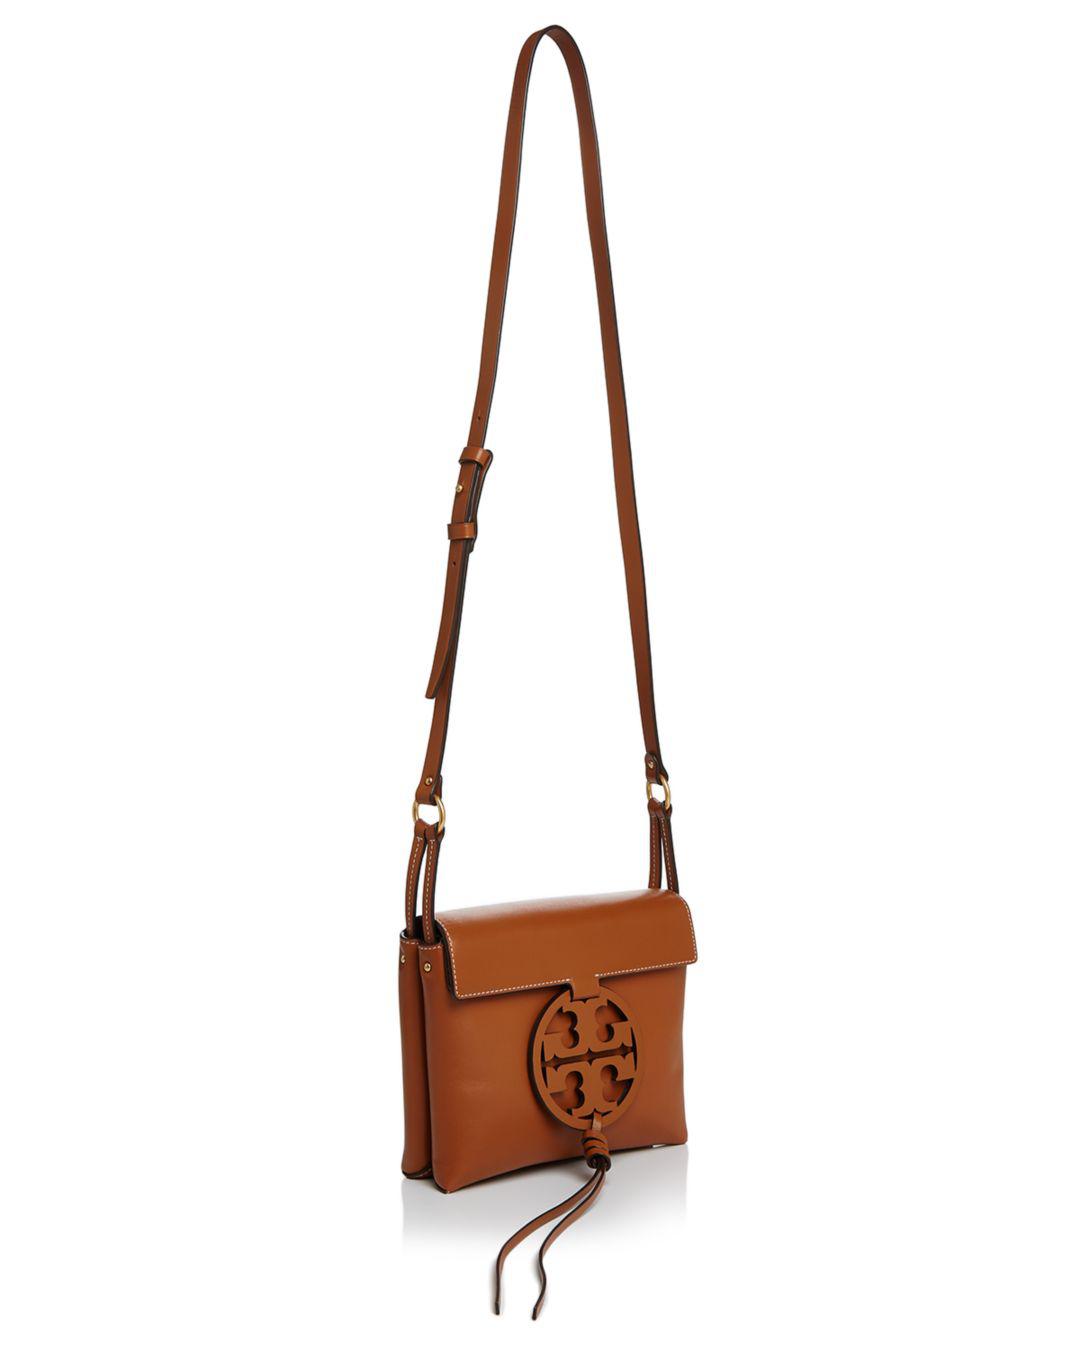 Lyst - Tory Burch Miller Soft Leather Crossbody Bag in Brown